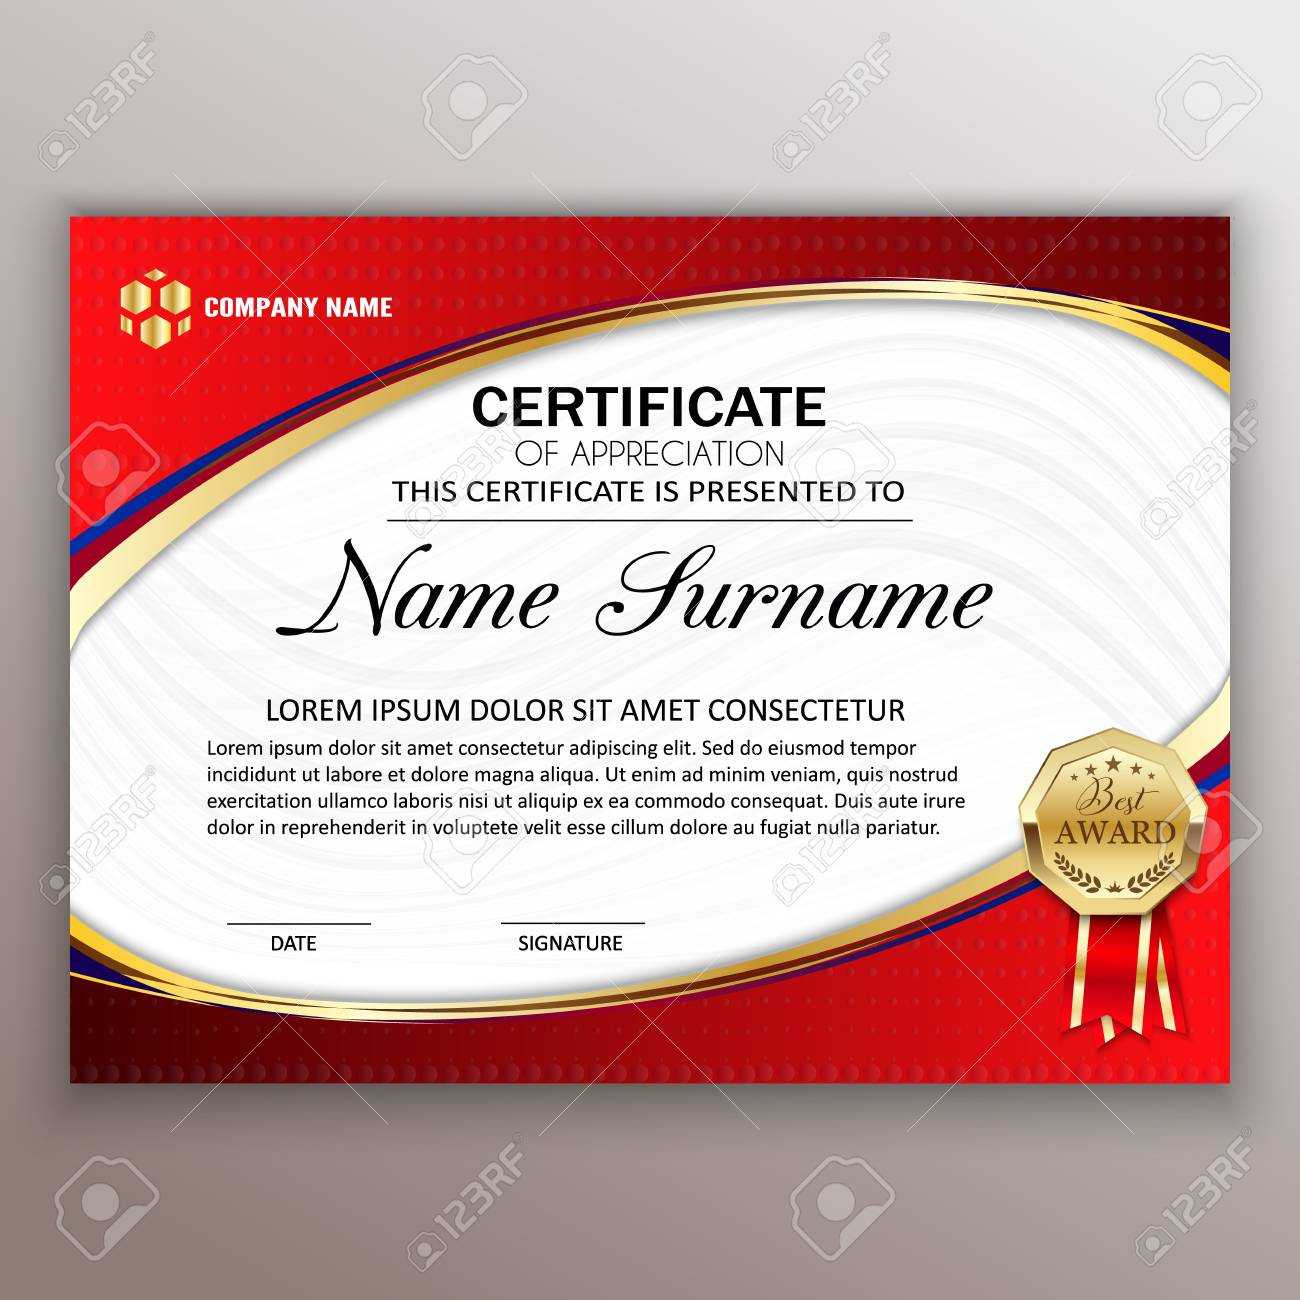 Beautiful Certificate Template Design With Best Award Symbol With Manager Of The Month Certificate Template